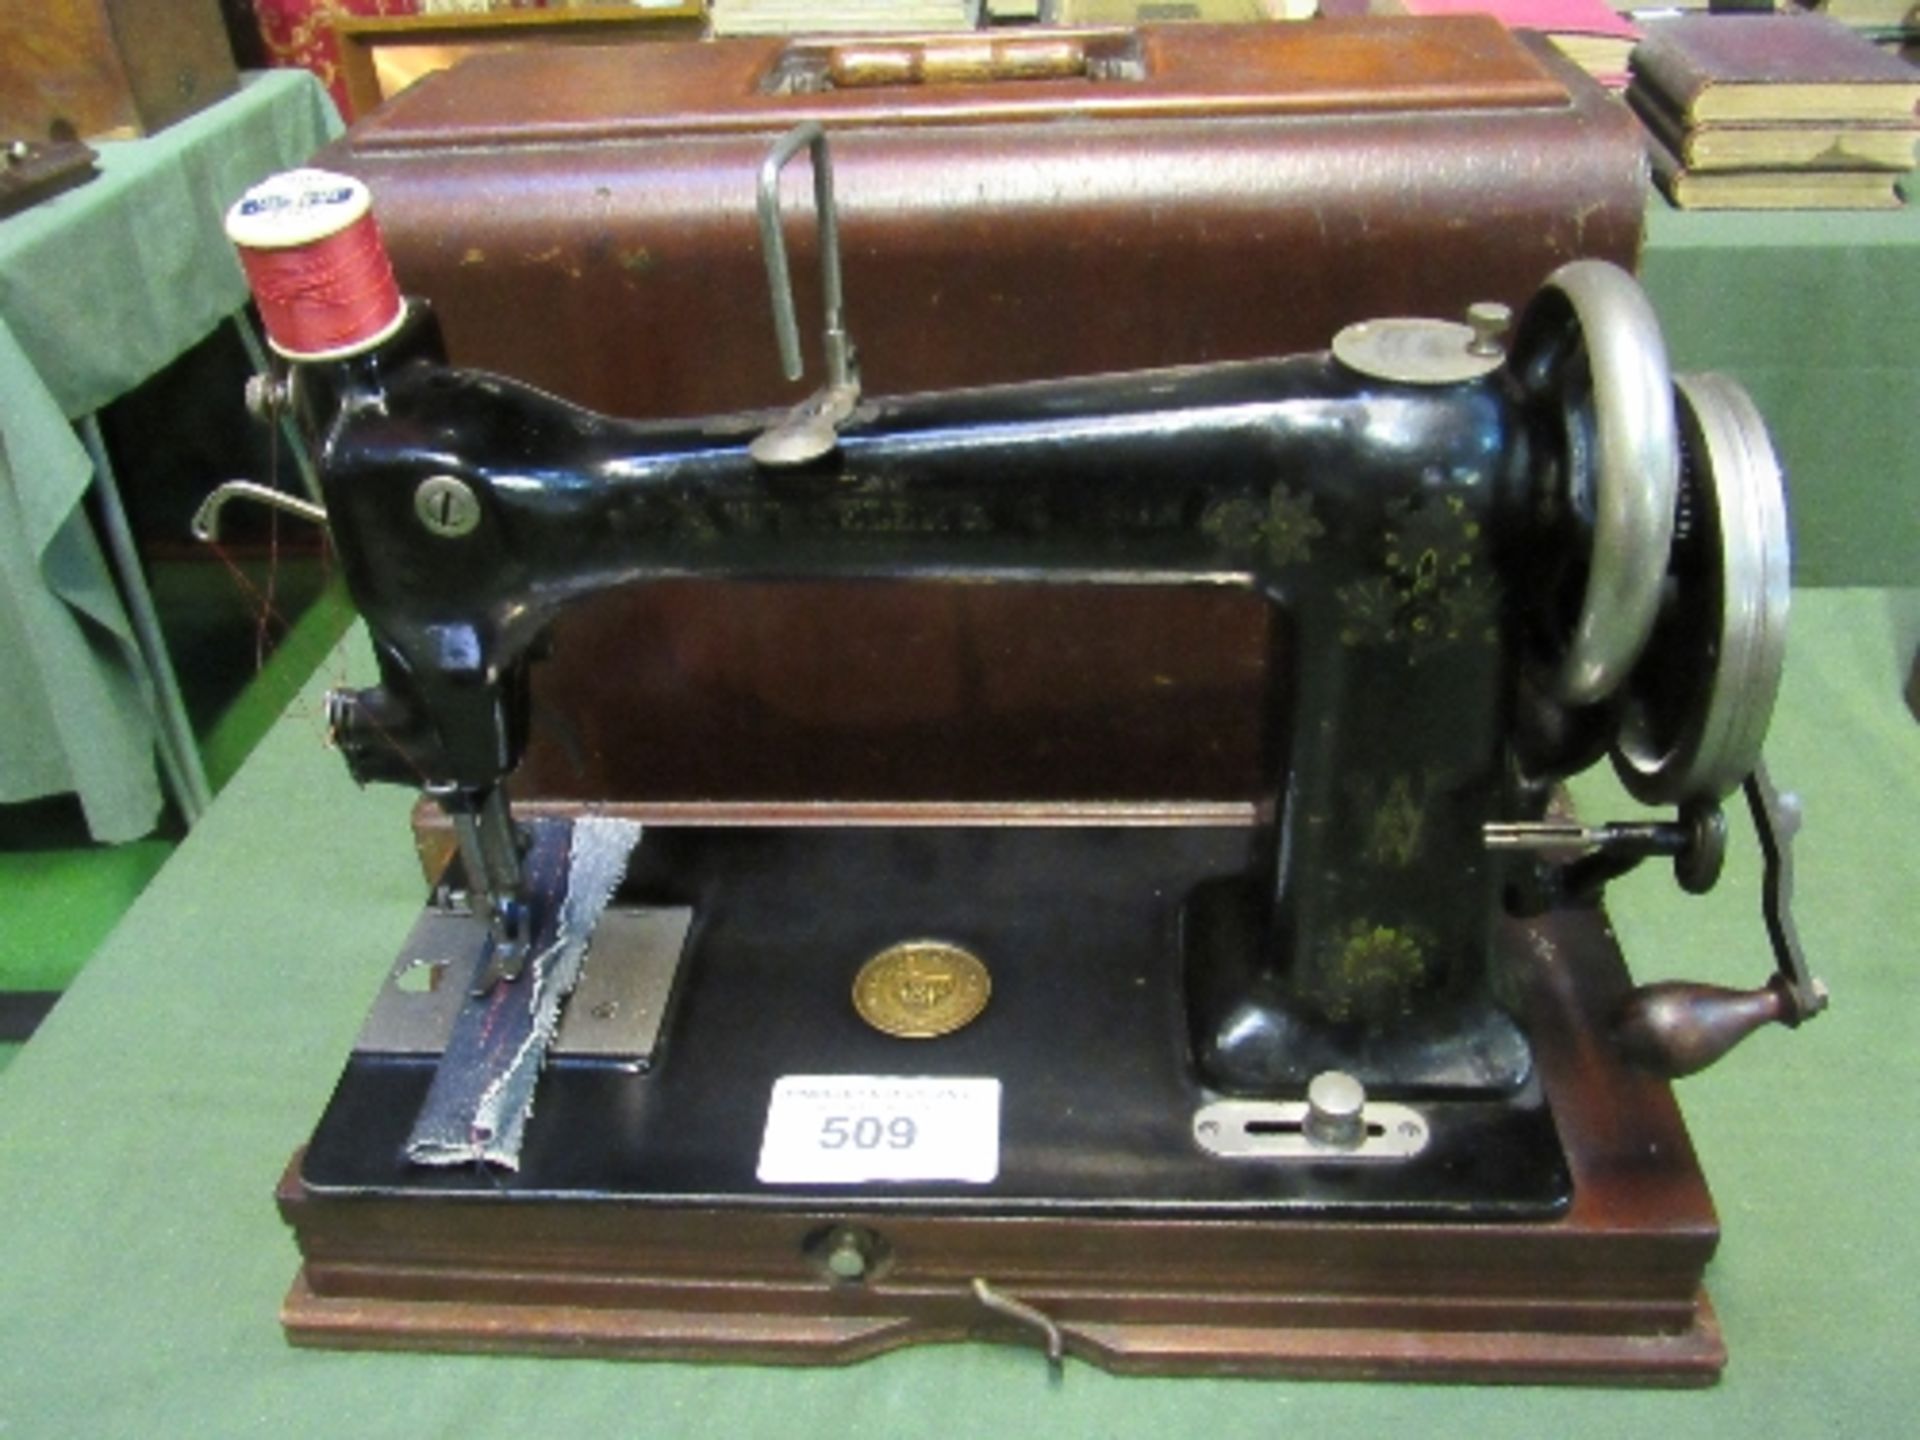 Wheeler and Wilson D-9 (1895-1905) sewing machine. Est £20-40 plus VAT on the hammer price